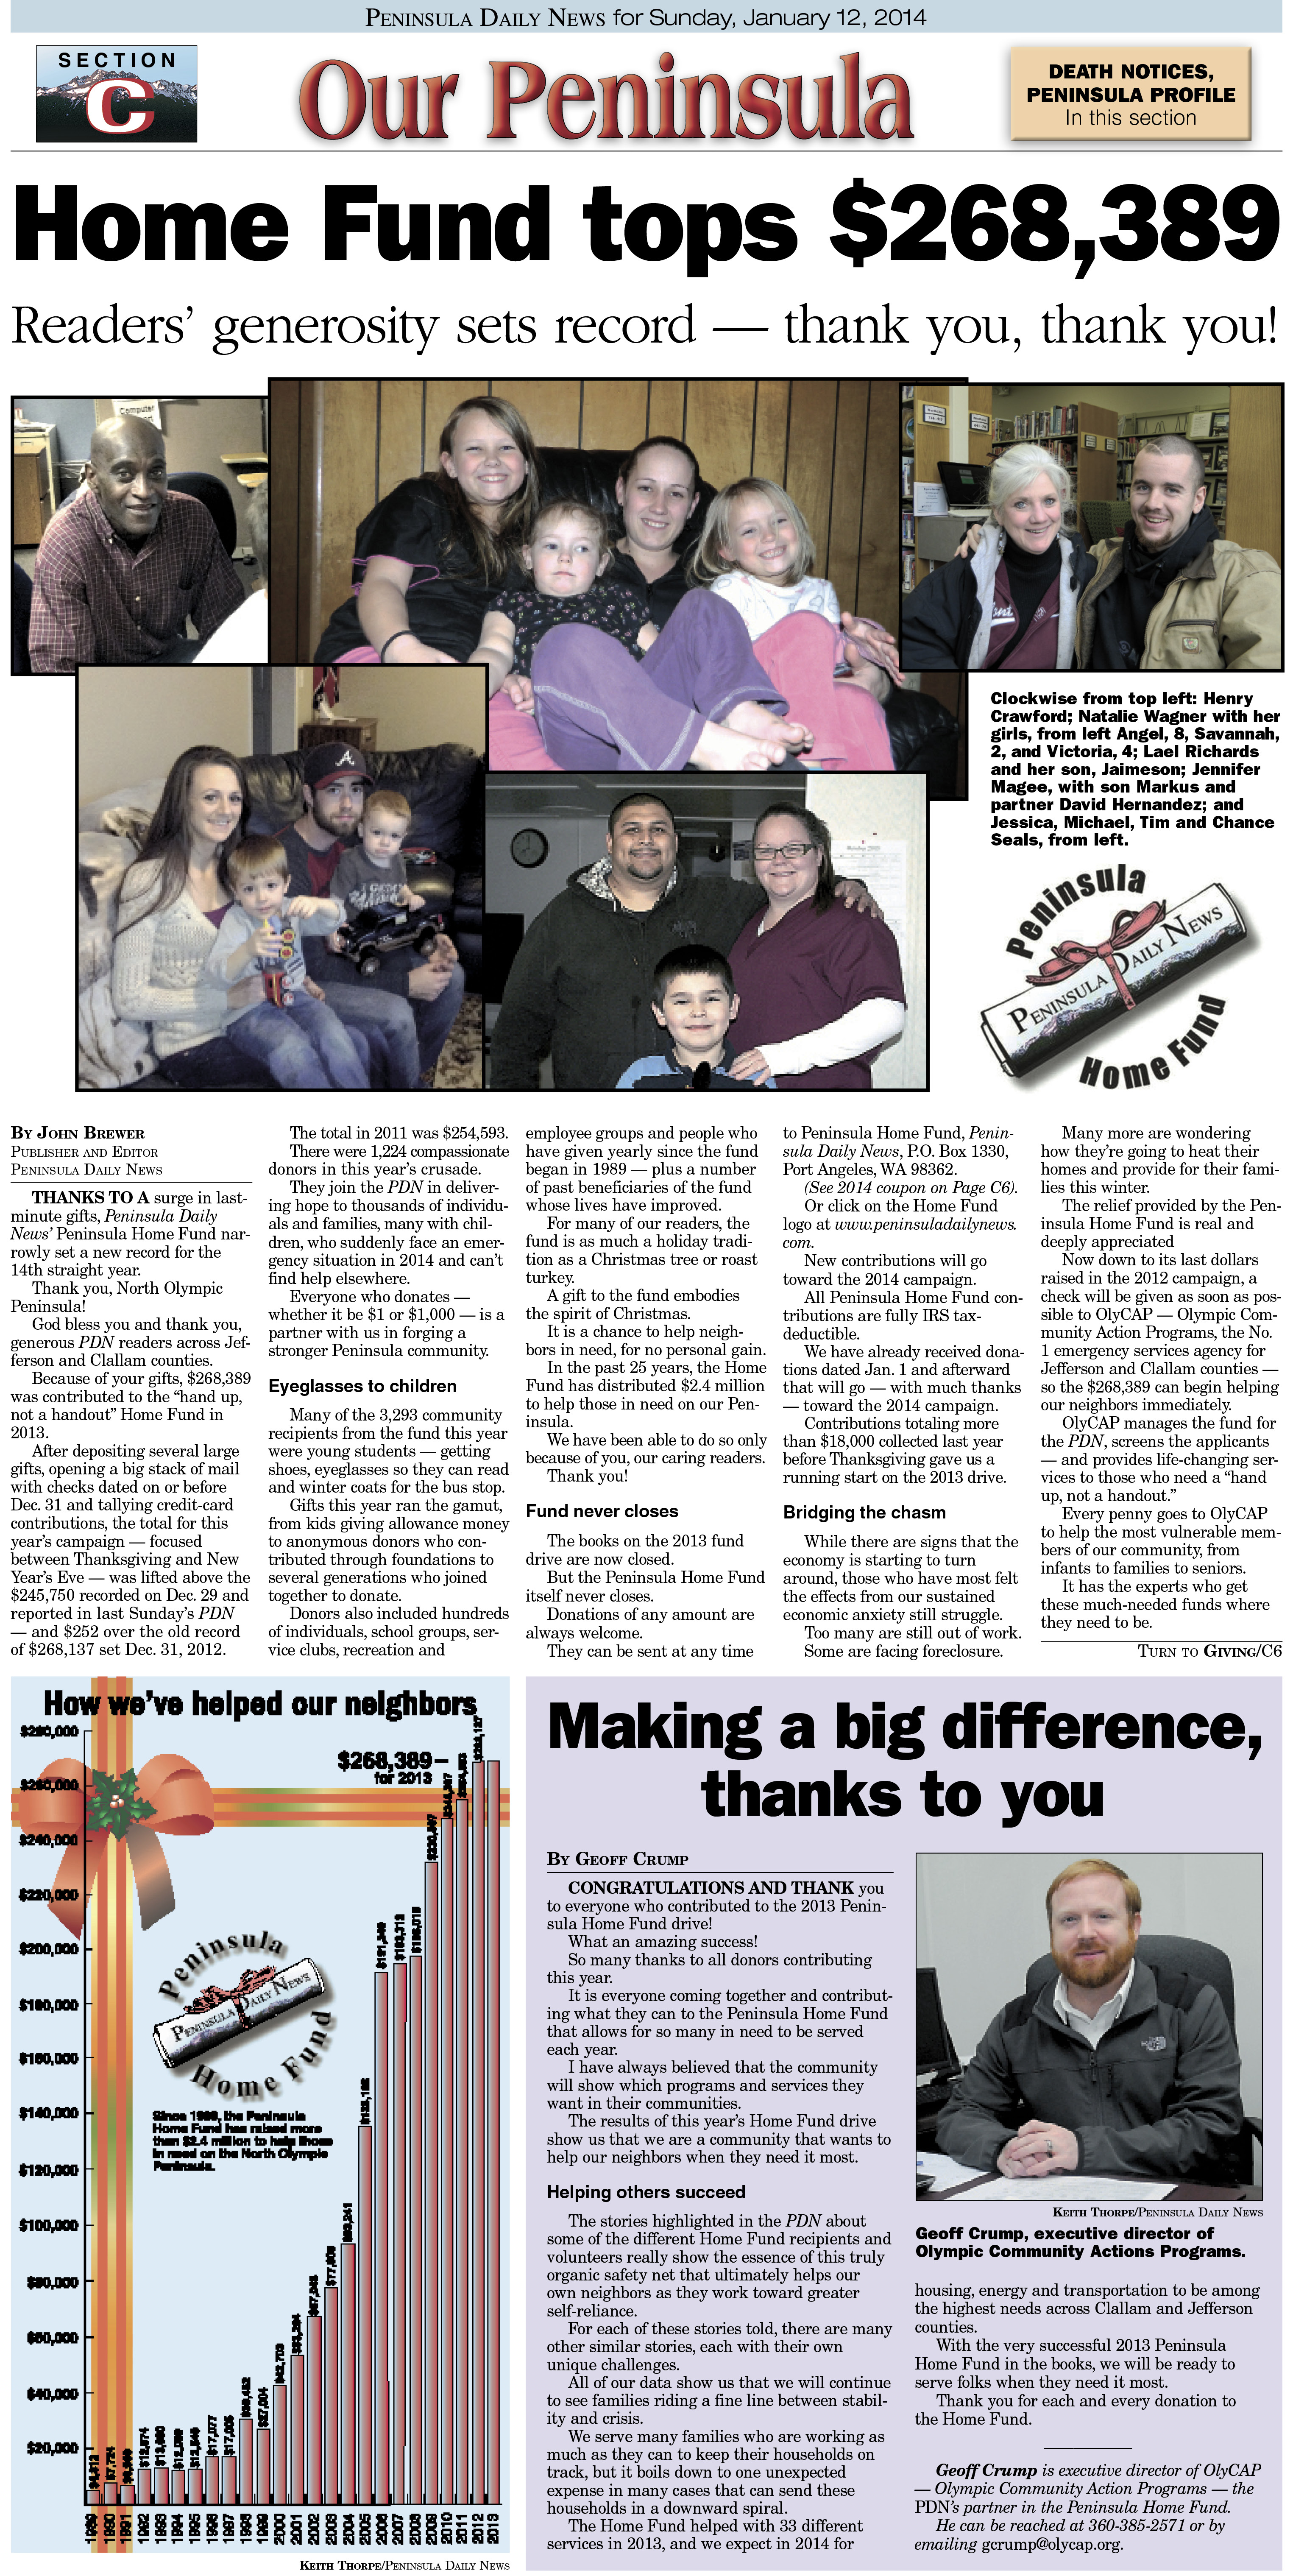 Our thank-you card to Peninsula Home Fund contributors in the form of a full page in the Sunday PDN. The photos reprise some of the Home Fund recipients profiled during the 2013 campaign.